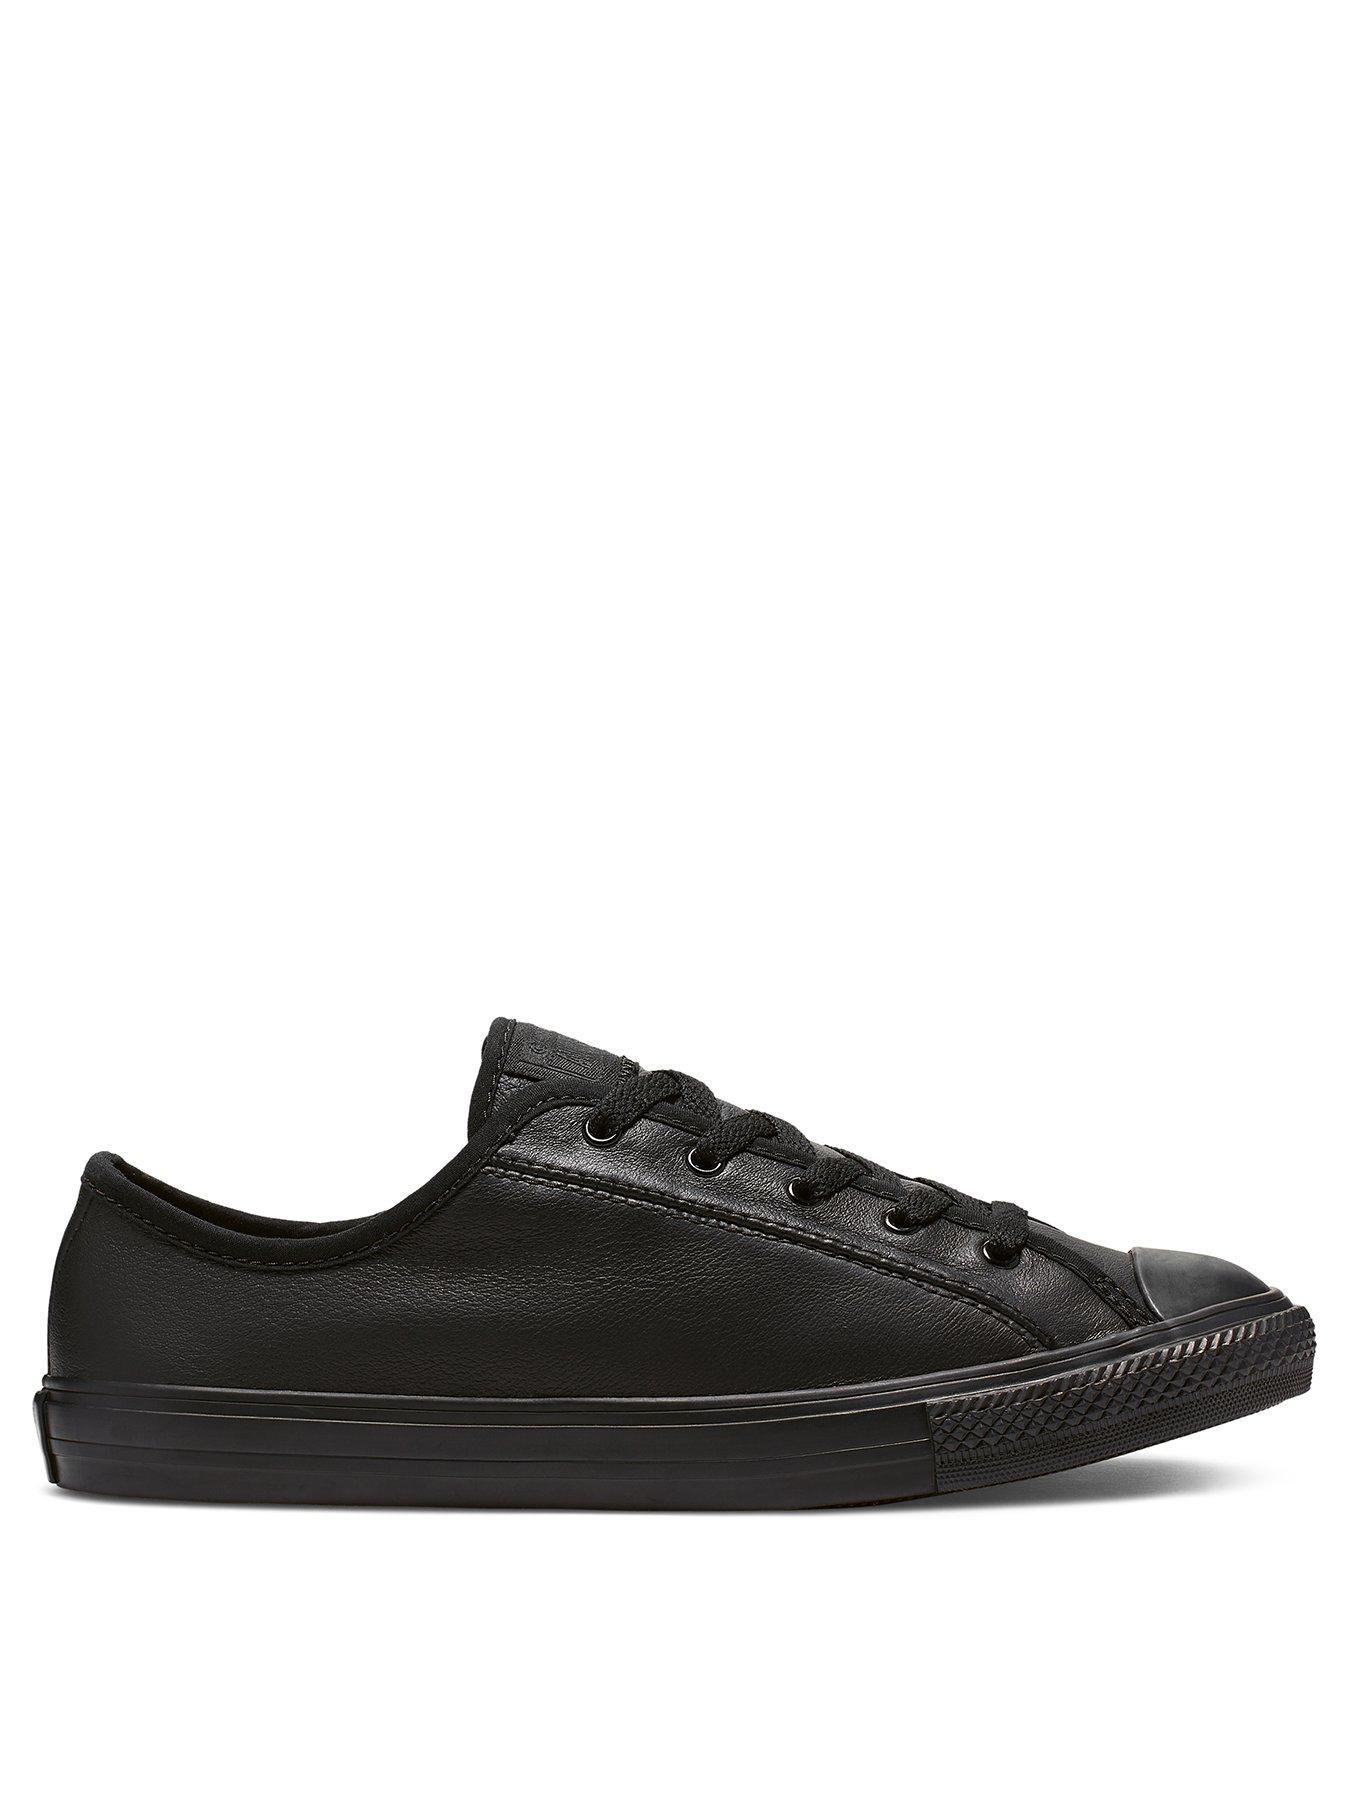 converse leather dainty ox